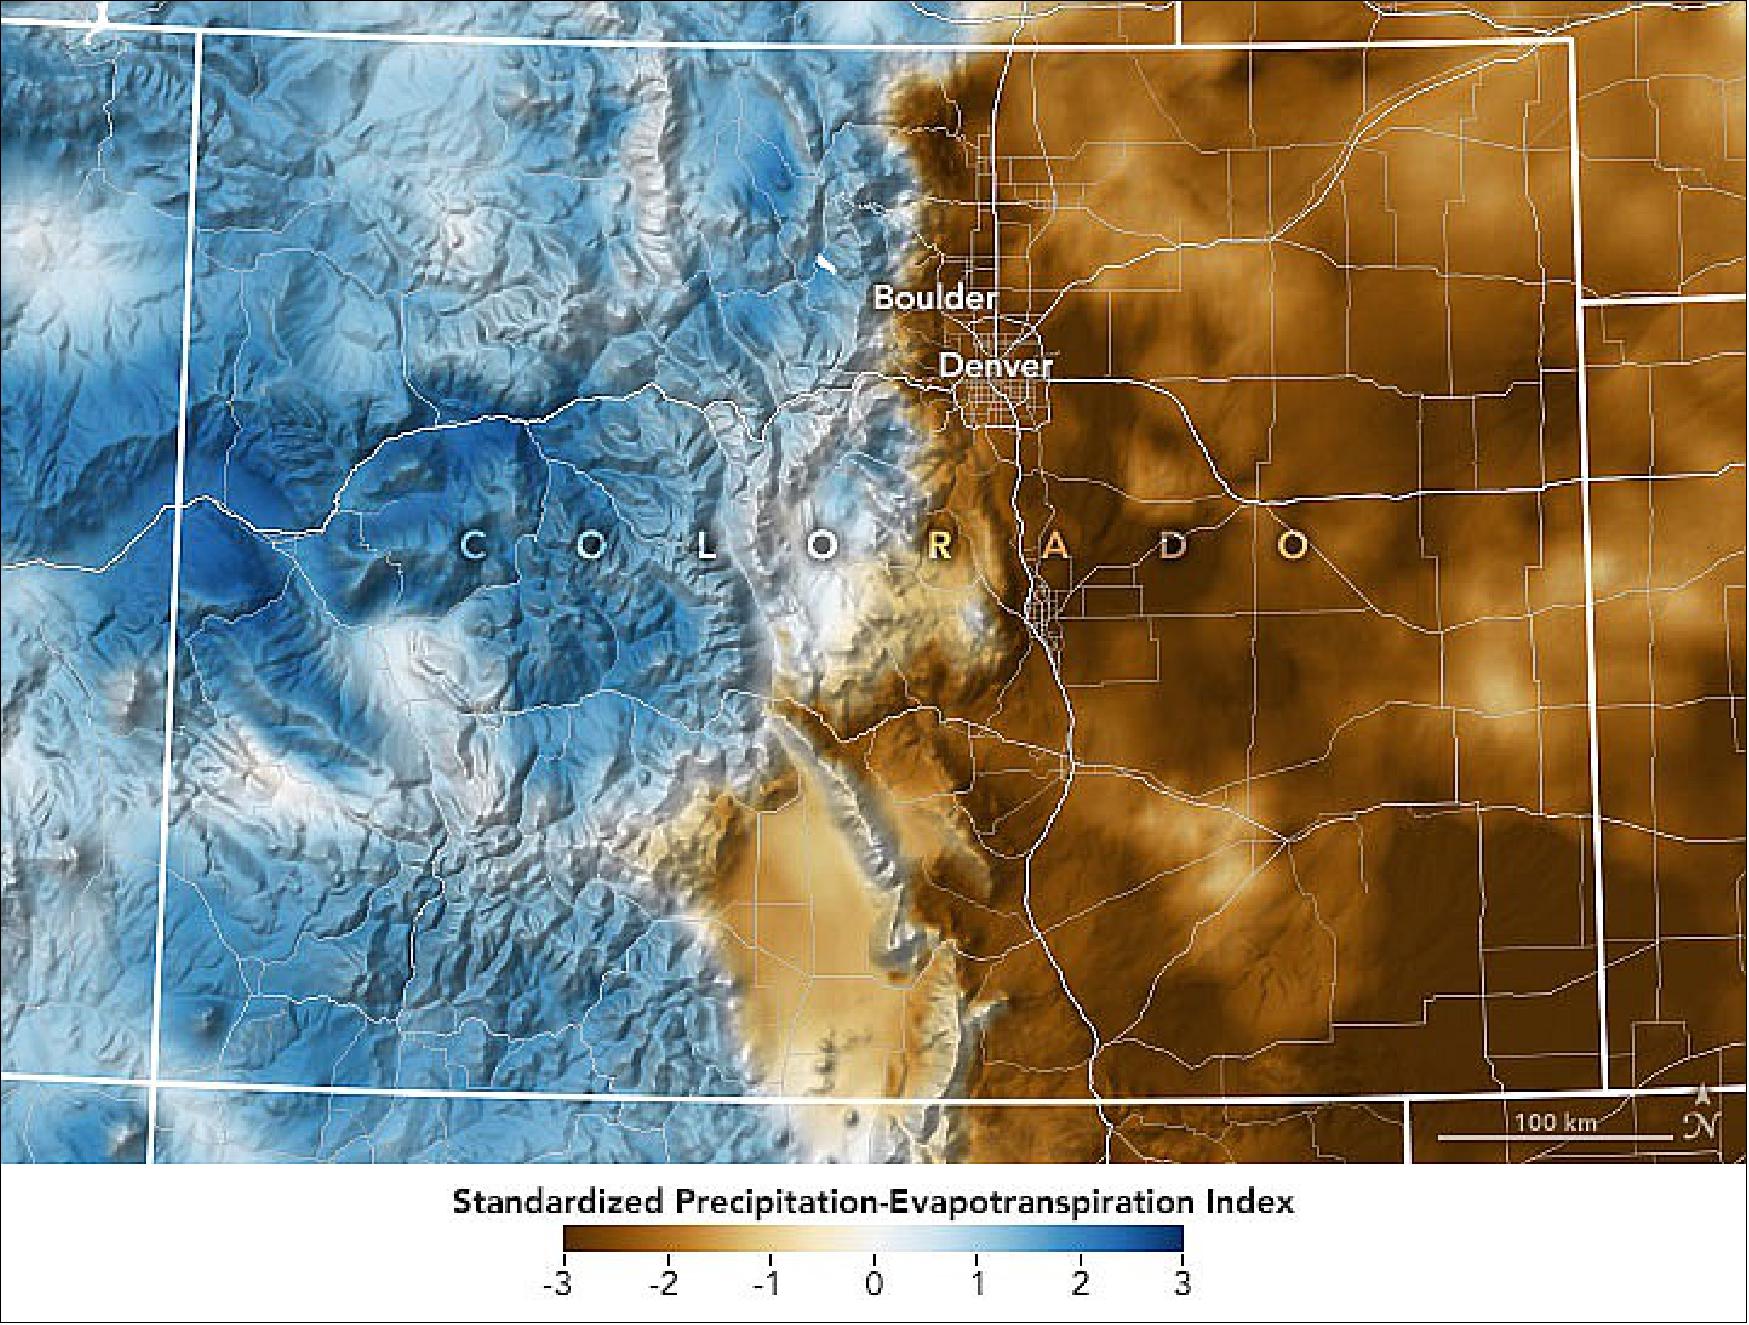 Figure 49: In 2021, Colorado saw an unseasonably warm summer and fall, coupled with record dryness. The warm, dry spell followed an unusually wet spring, which reduced wildfires through the summer and fueled the growth of vegetation—which then dried out and provided ample tinder for the December fire (image credit: NASA Earth Observatory)